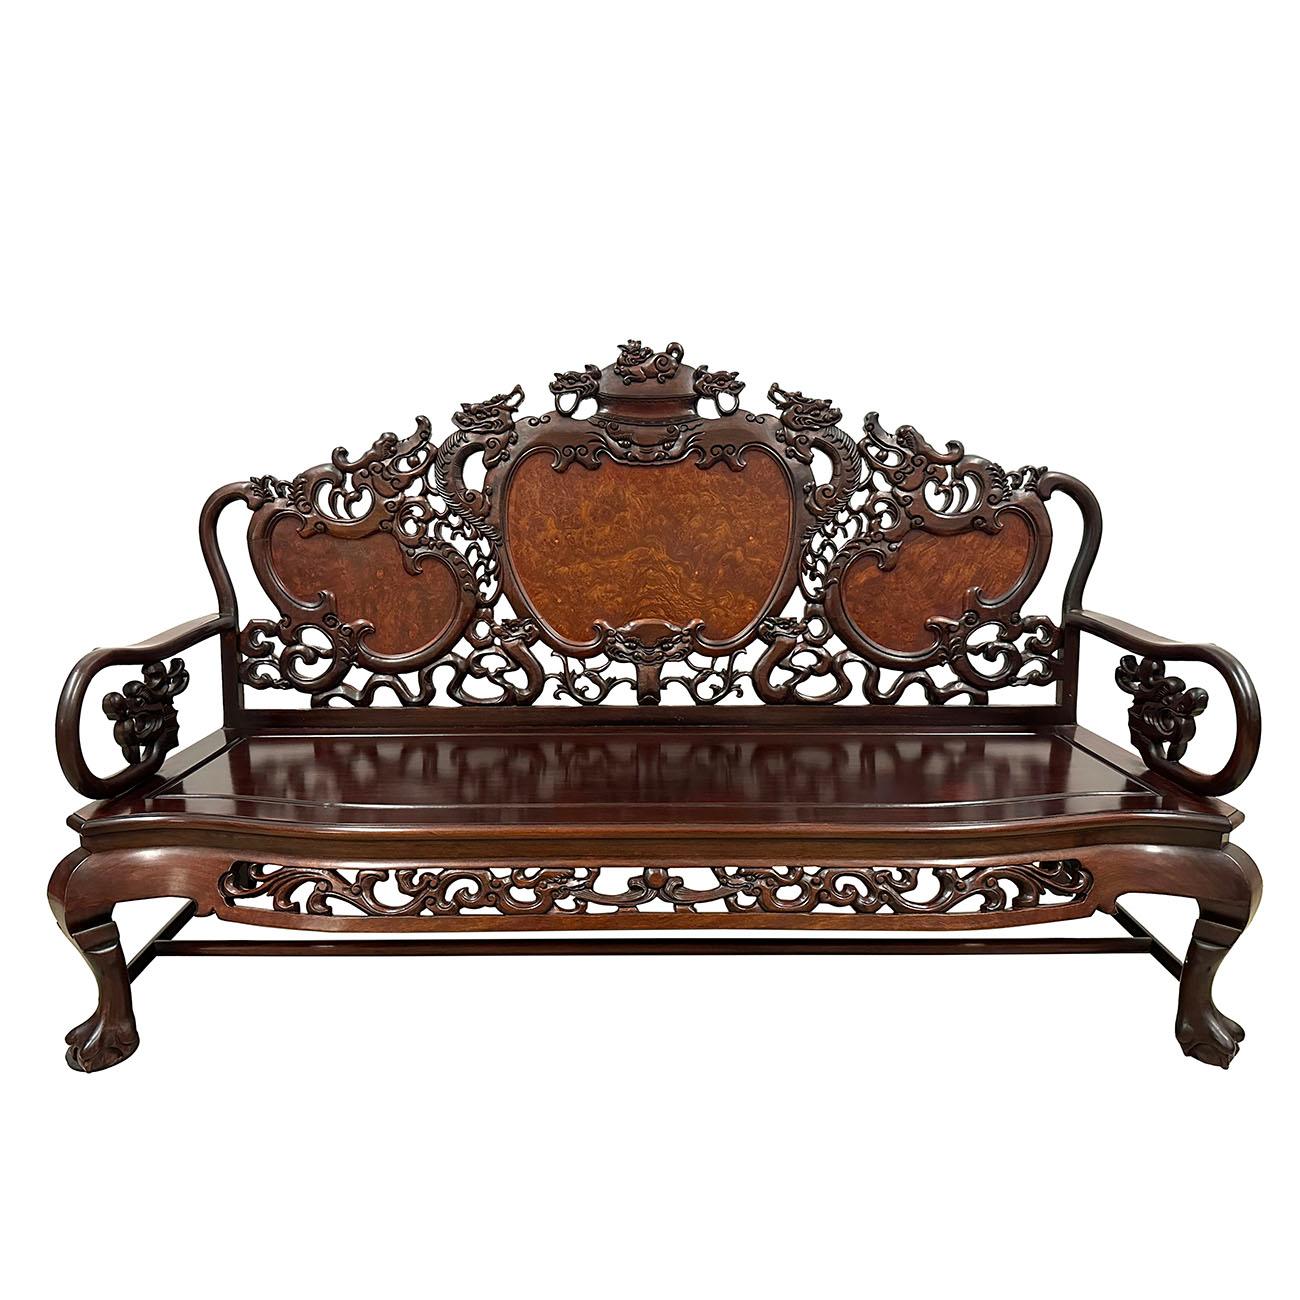 This gorgeous Antique Chinese Rosewood Carved Long Bench, Sofa was made in early 20th Century and still has its original condition, very smooth to touch, full of patina. It was hand made and hand carved with solid rosewood with 3 pieces burl wood